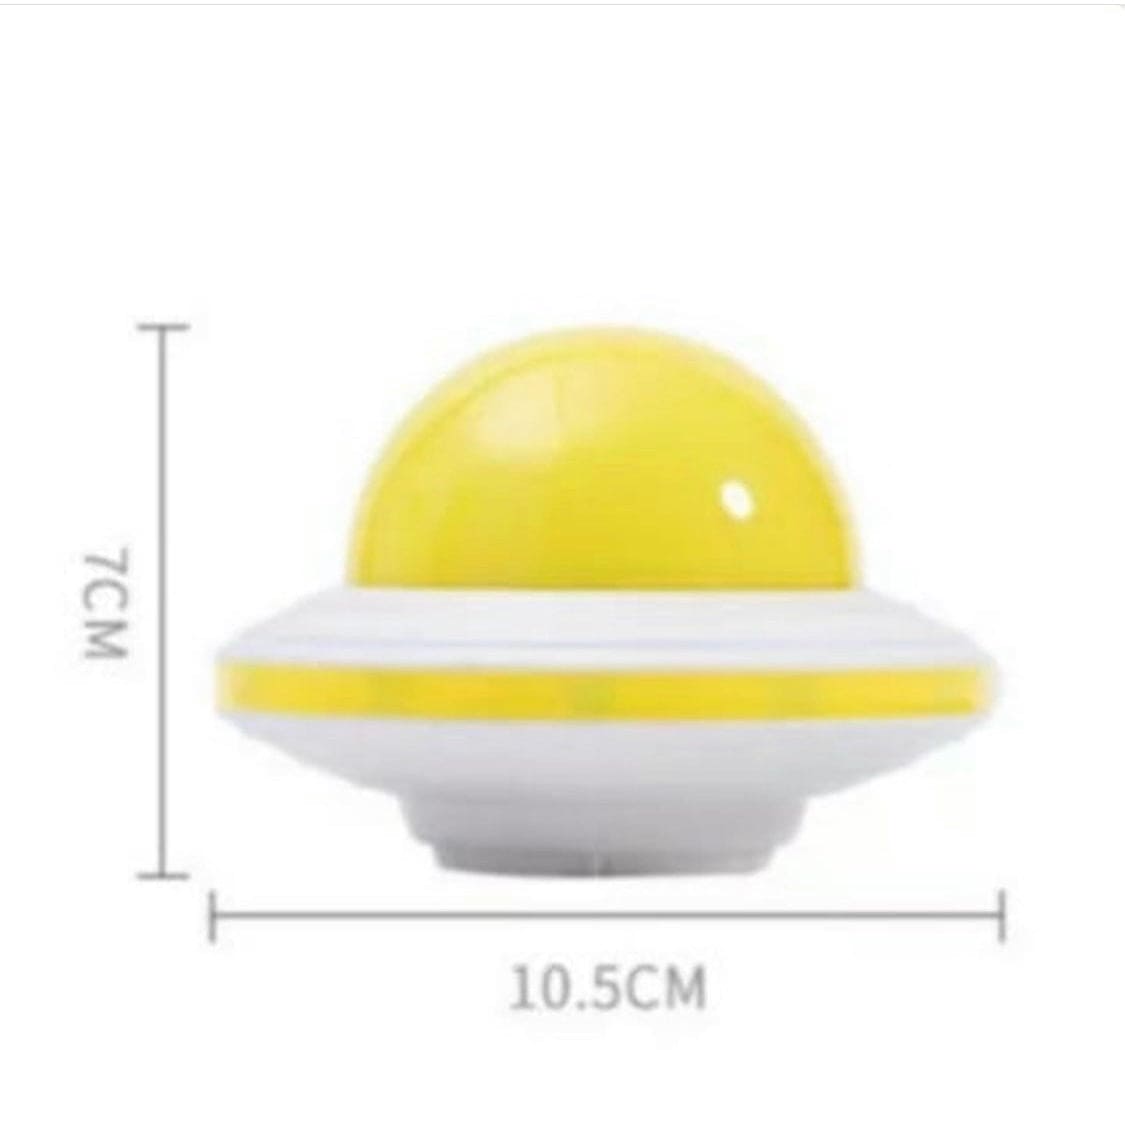 Remote Control LED Night Light, Space Ship Intelligent Remote Control Night Light, Mini Beside Lightning Lamp For Children Bed Room